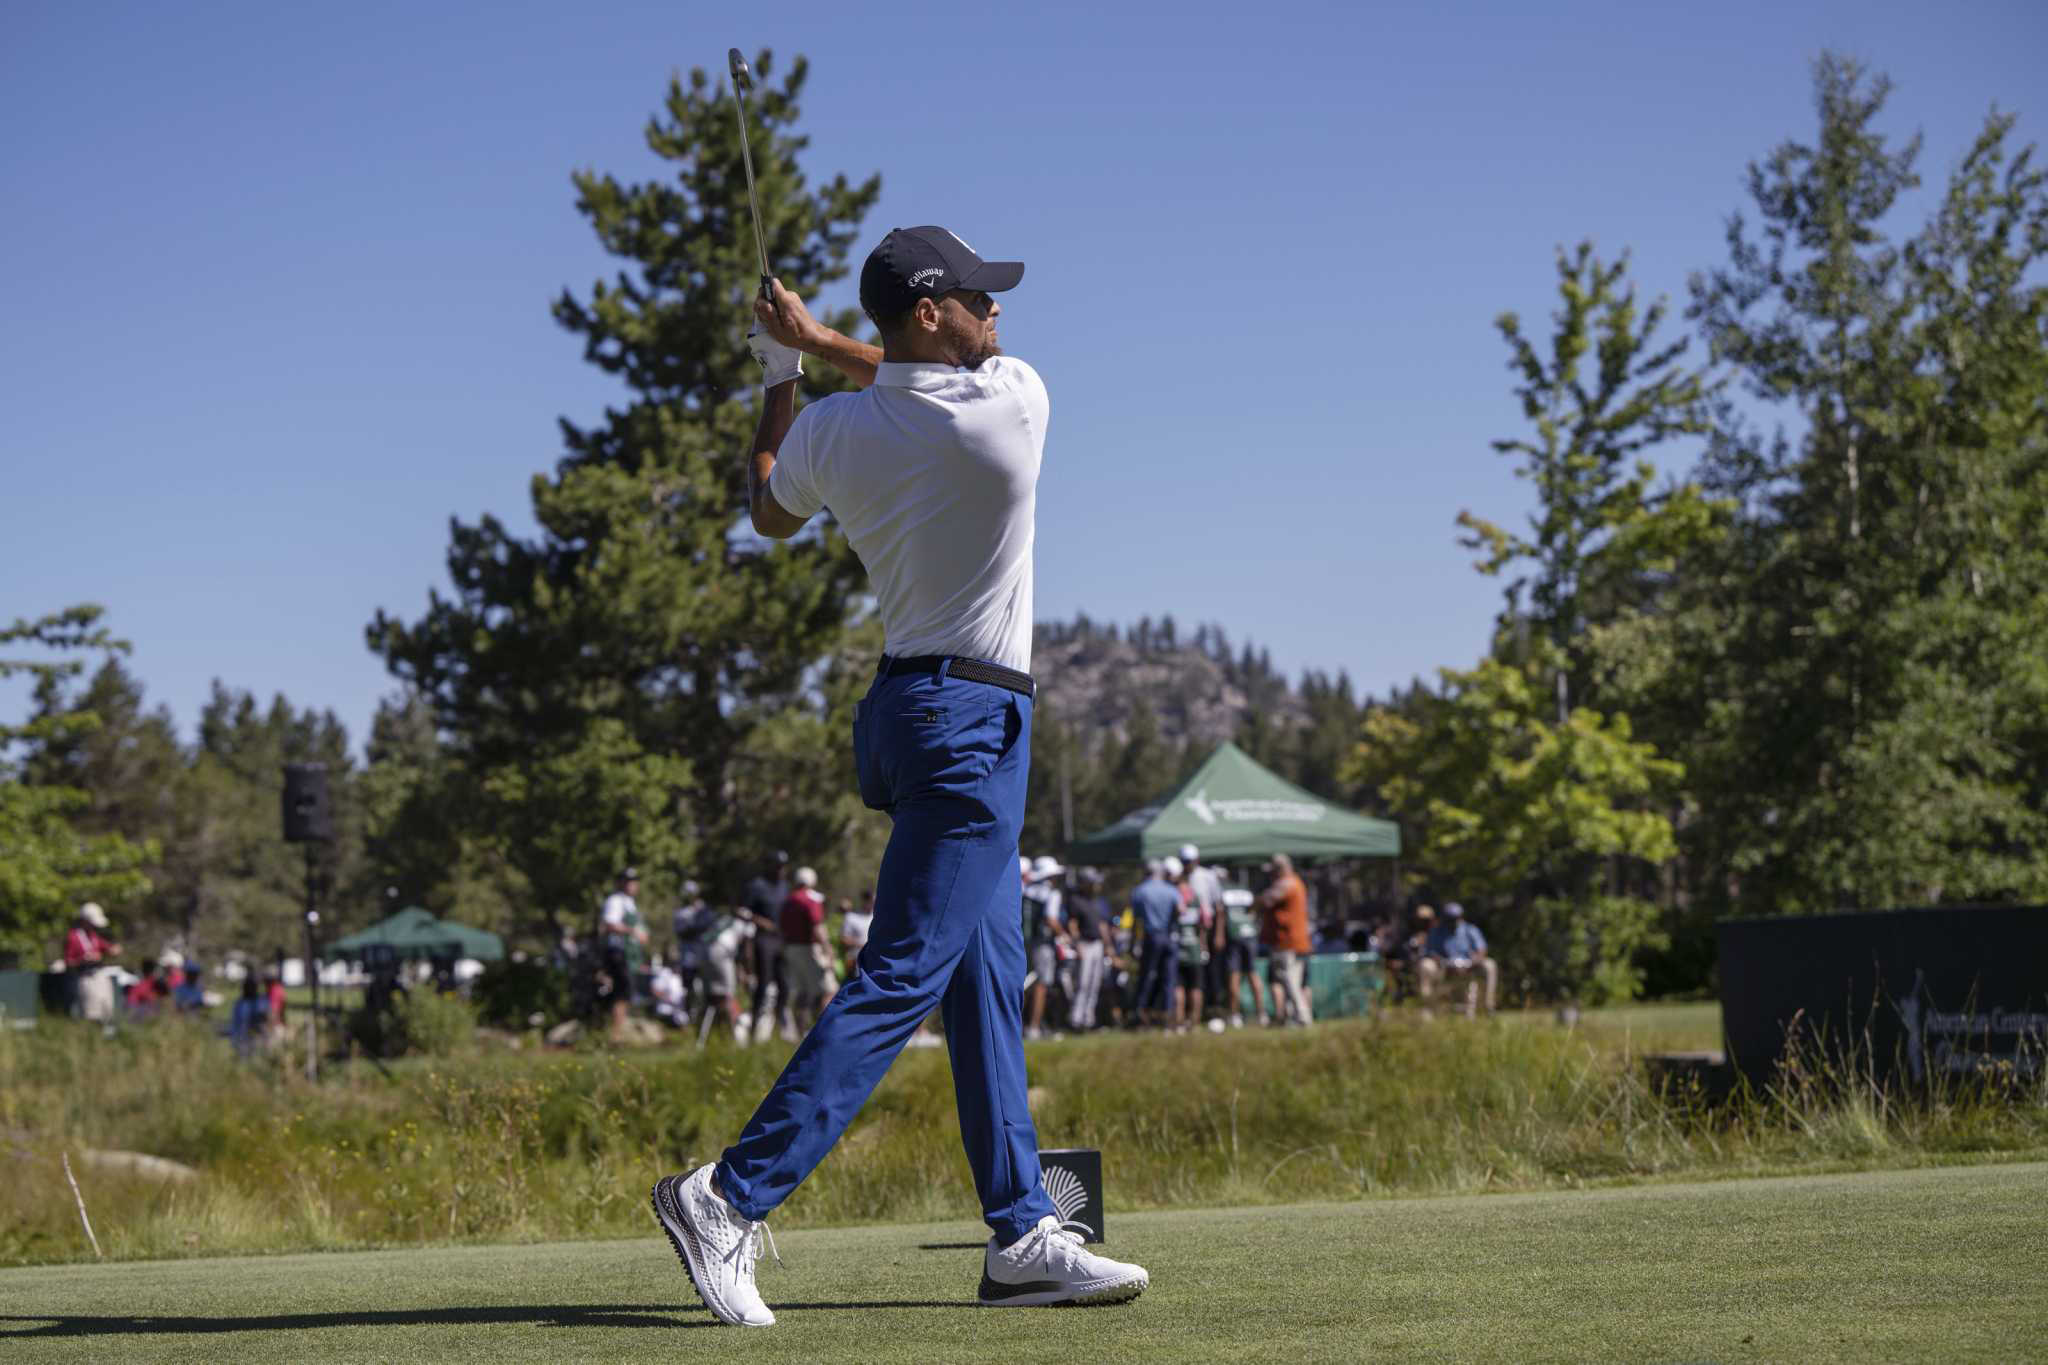 Steph Curry surges into the lead at Tahoe celebrity golf tournament